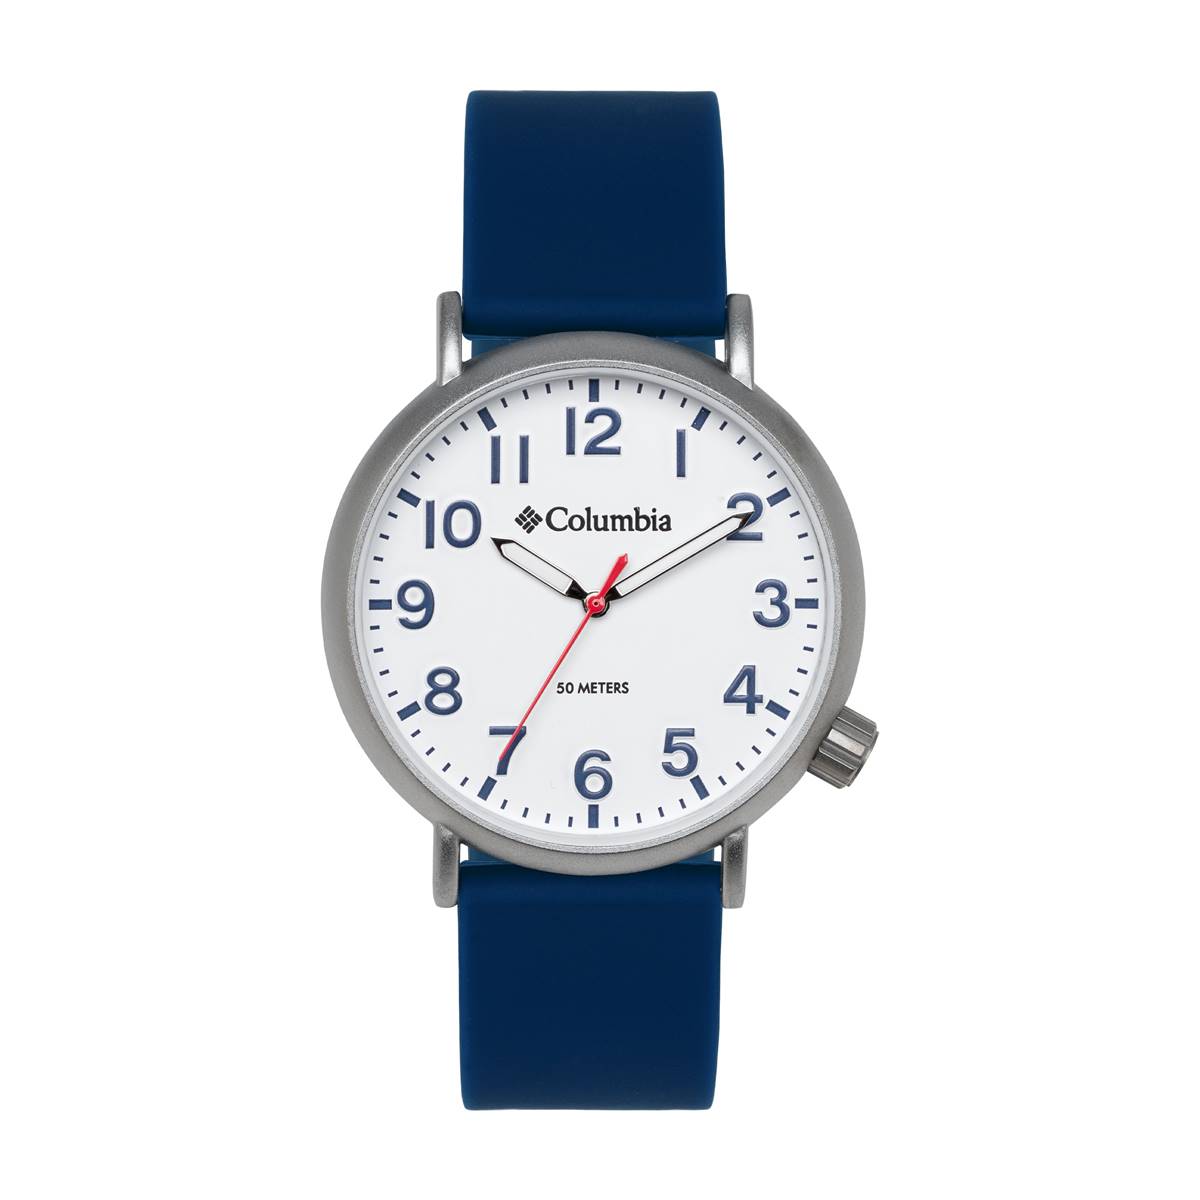 Unisex Columbia Sportswear Timing Navy Silicone Watch - CSS16-007